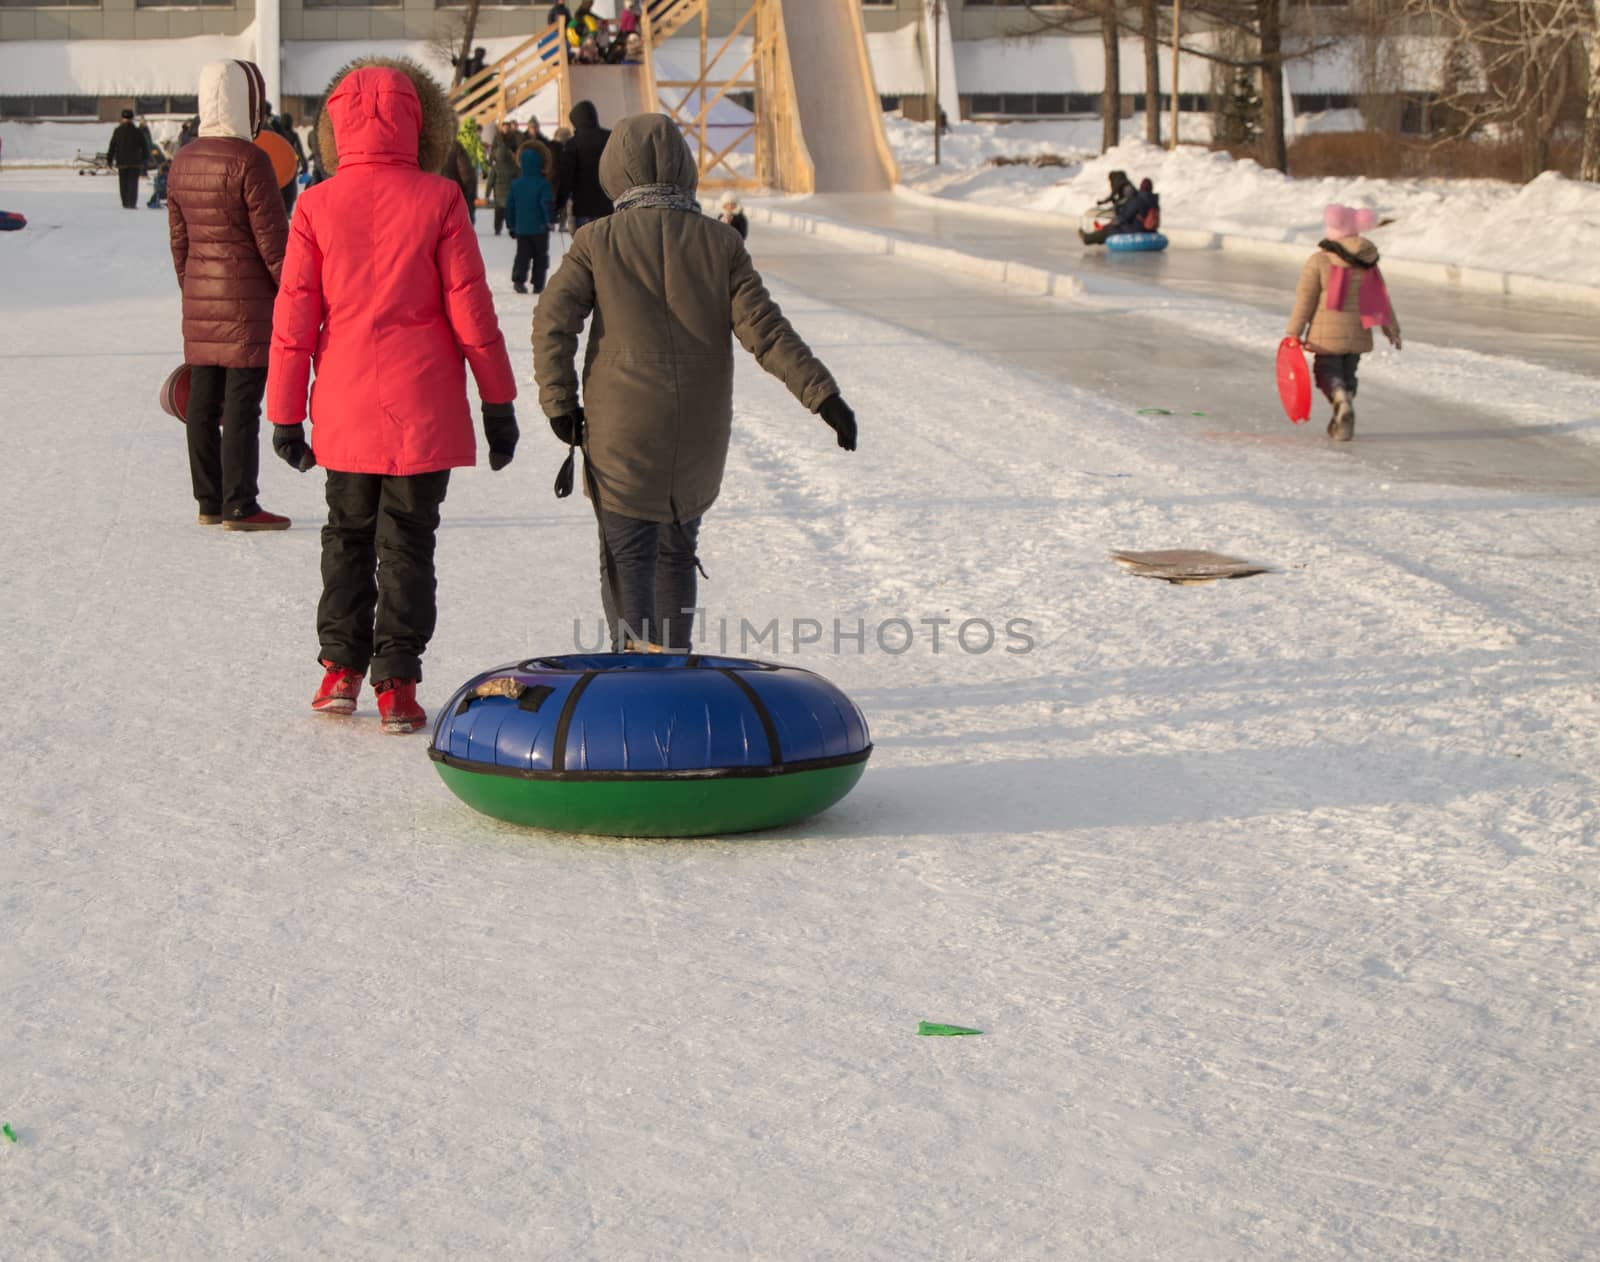 Two teen girls pull tubing after after sliding down the slope of an ice slide, winter fun in the Park.